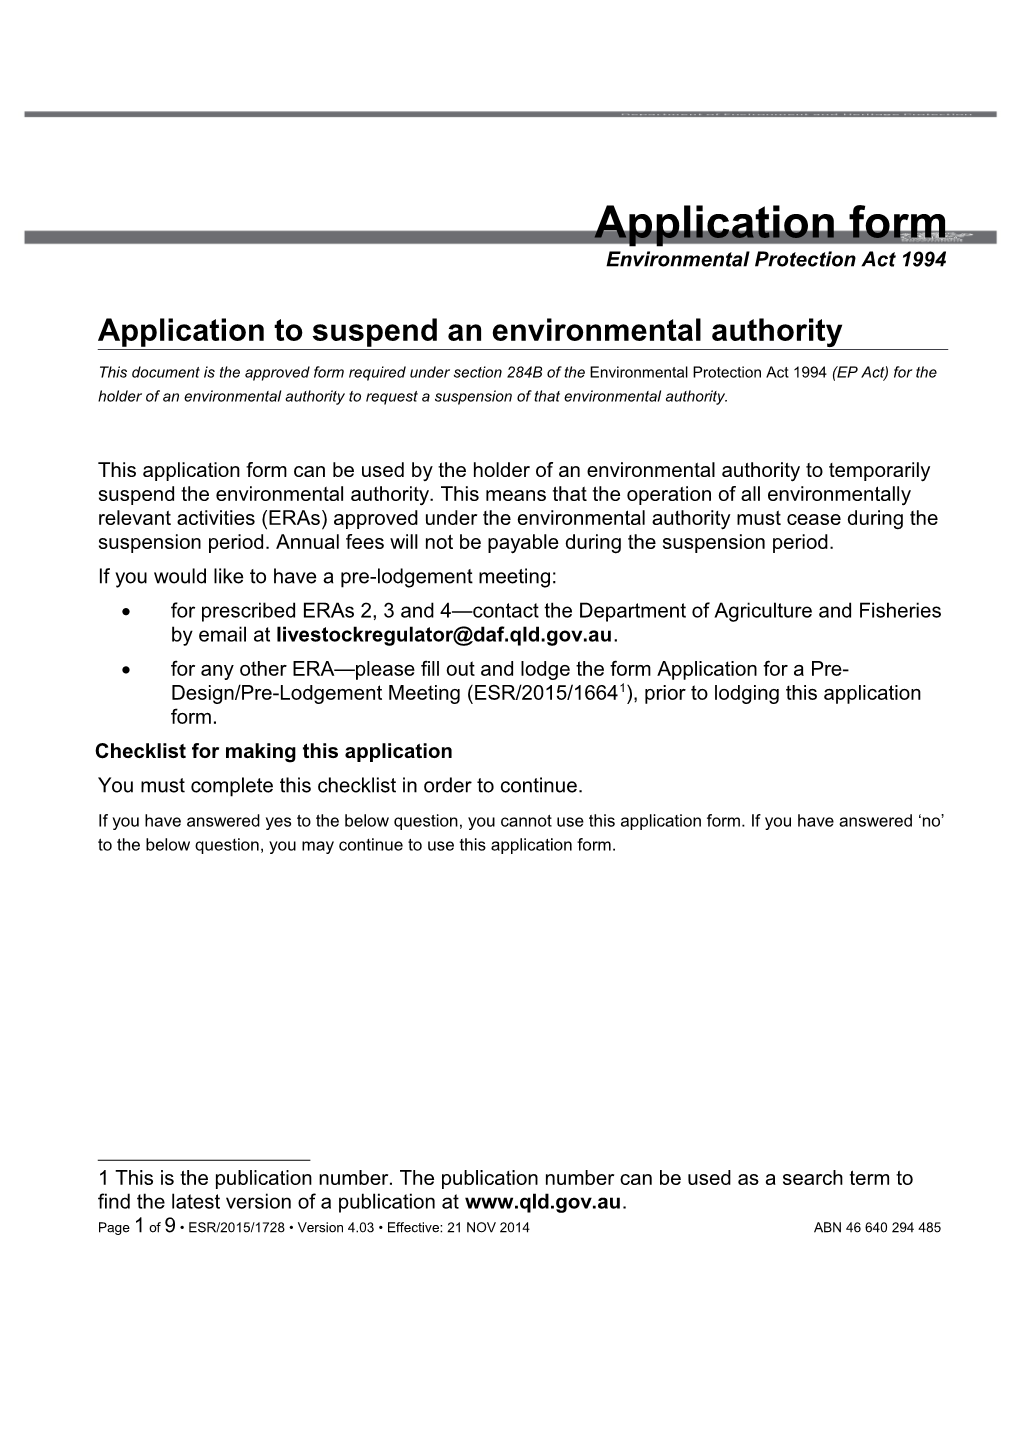 Application to Suspend an Environmental Authority